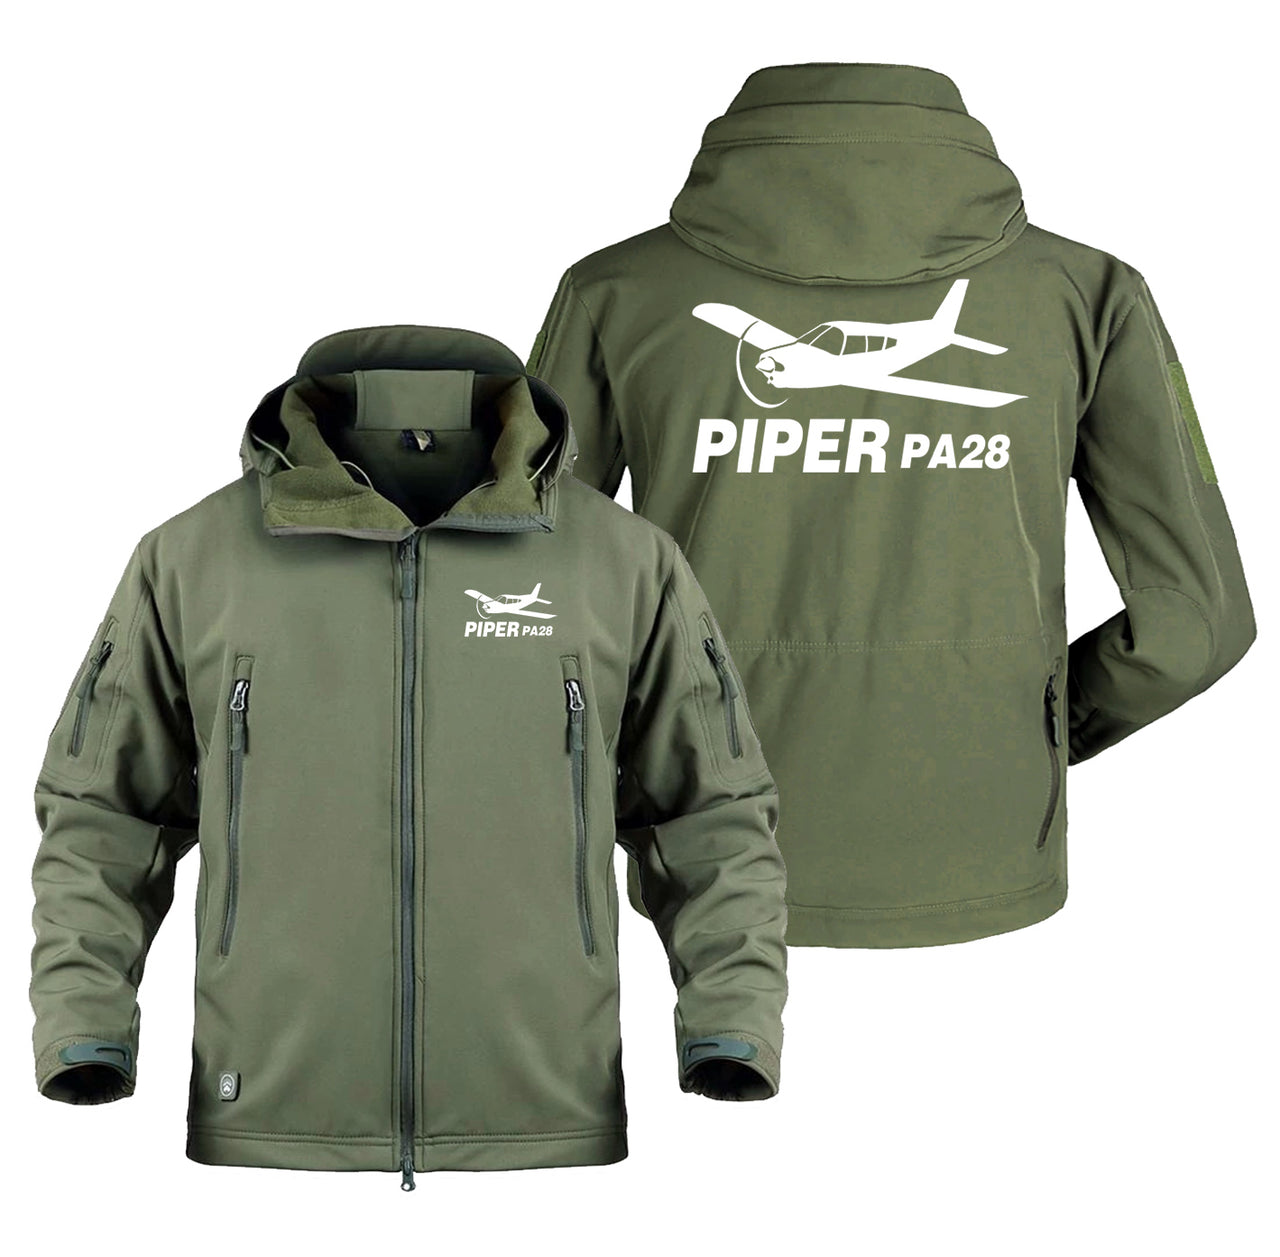 The Piper PA28 Designed Military Jackets (Customizable)